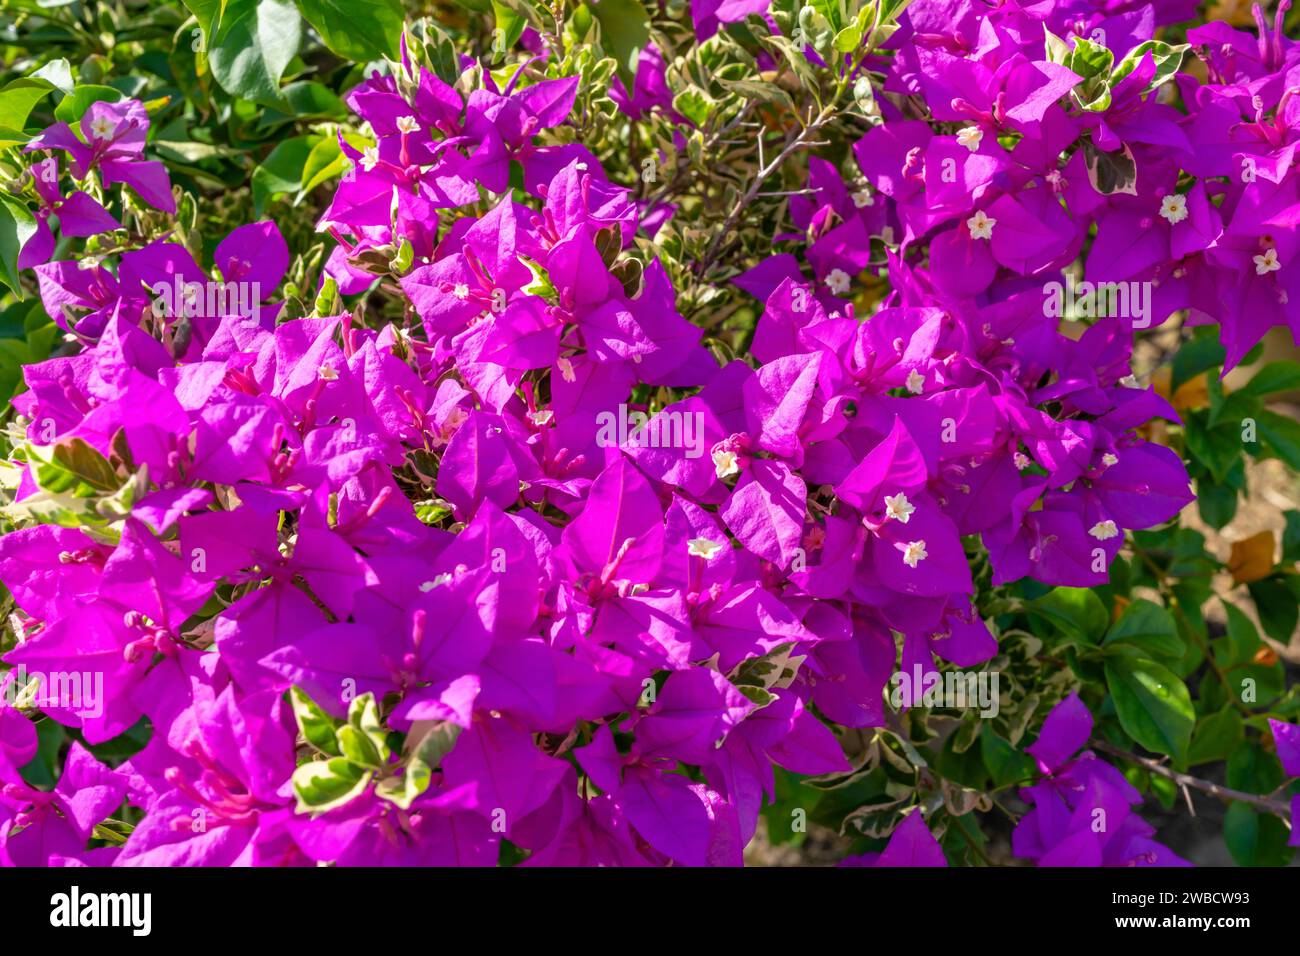 Bougainvillea is a popular tropical flowering plant in the garden. Stock Photo